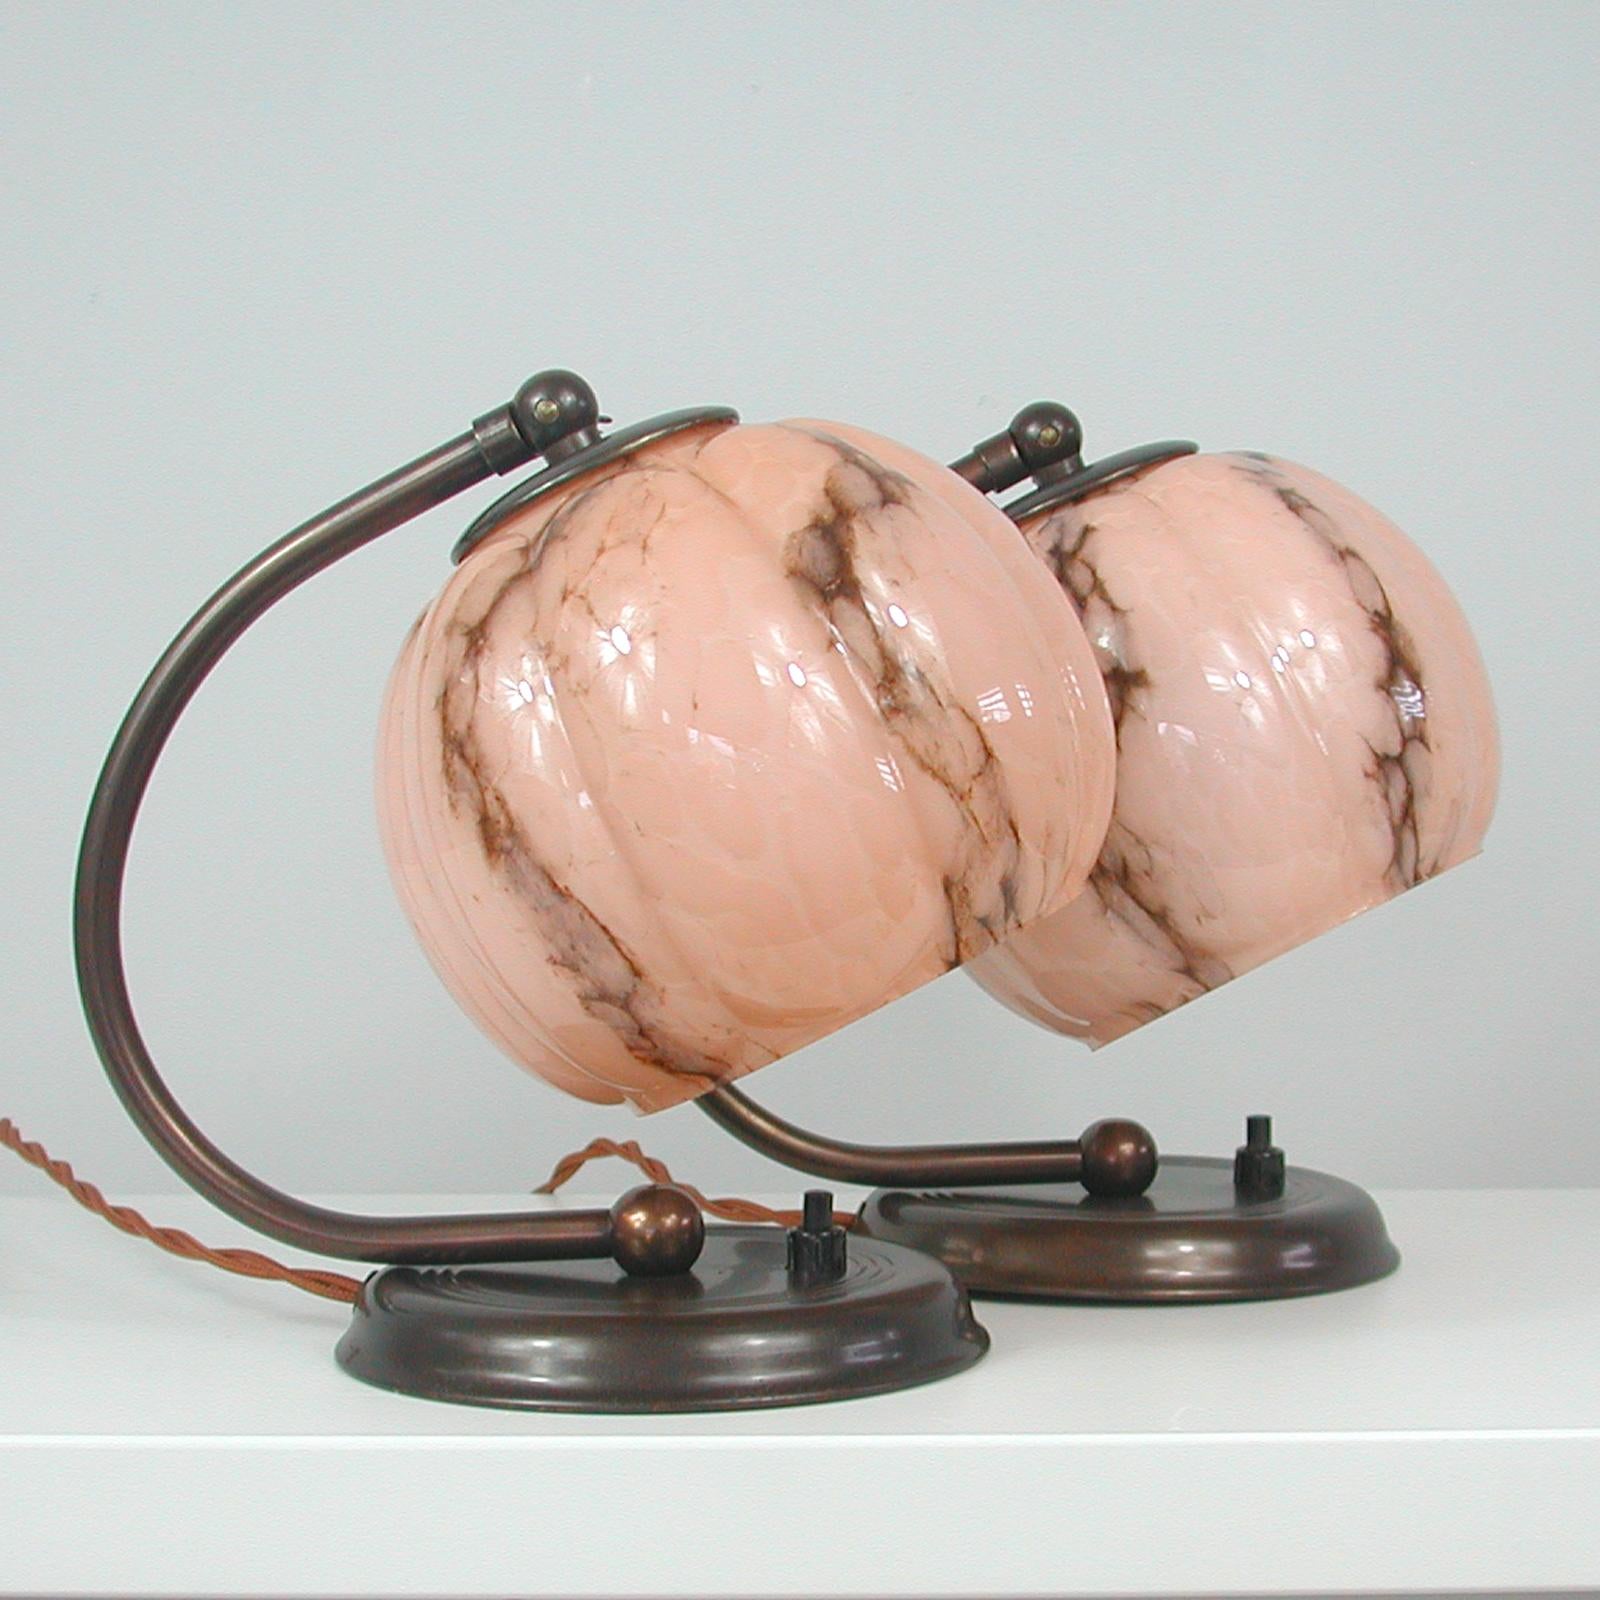 These unusual table or bedside lamps were designed and manufactured in Germany in the 1930s during the Art Deco / Bauhaus period. They are made of bronzed brass and have got pale pink / salmon colored marbled opaline glass lamp shades. The lamps